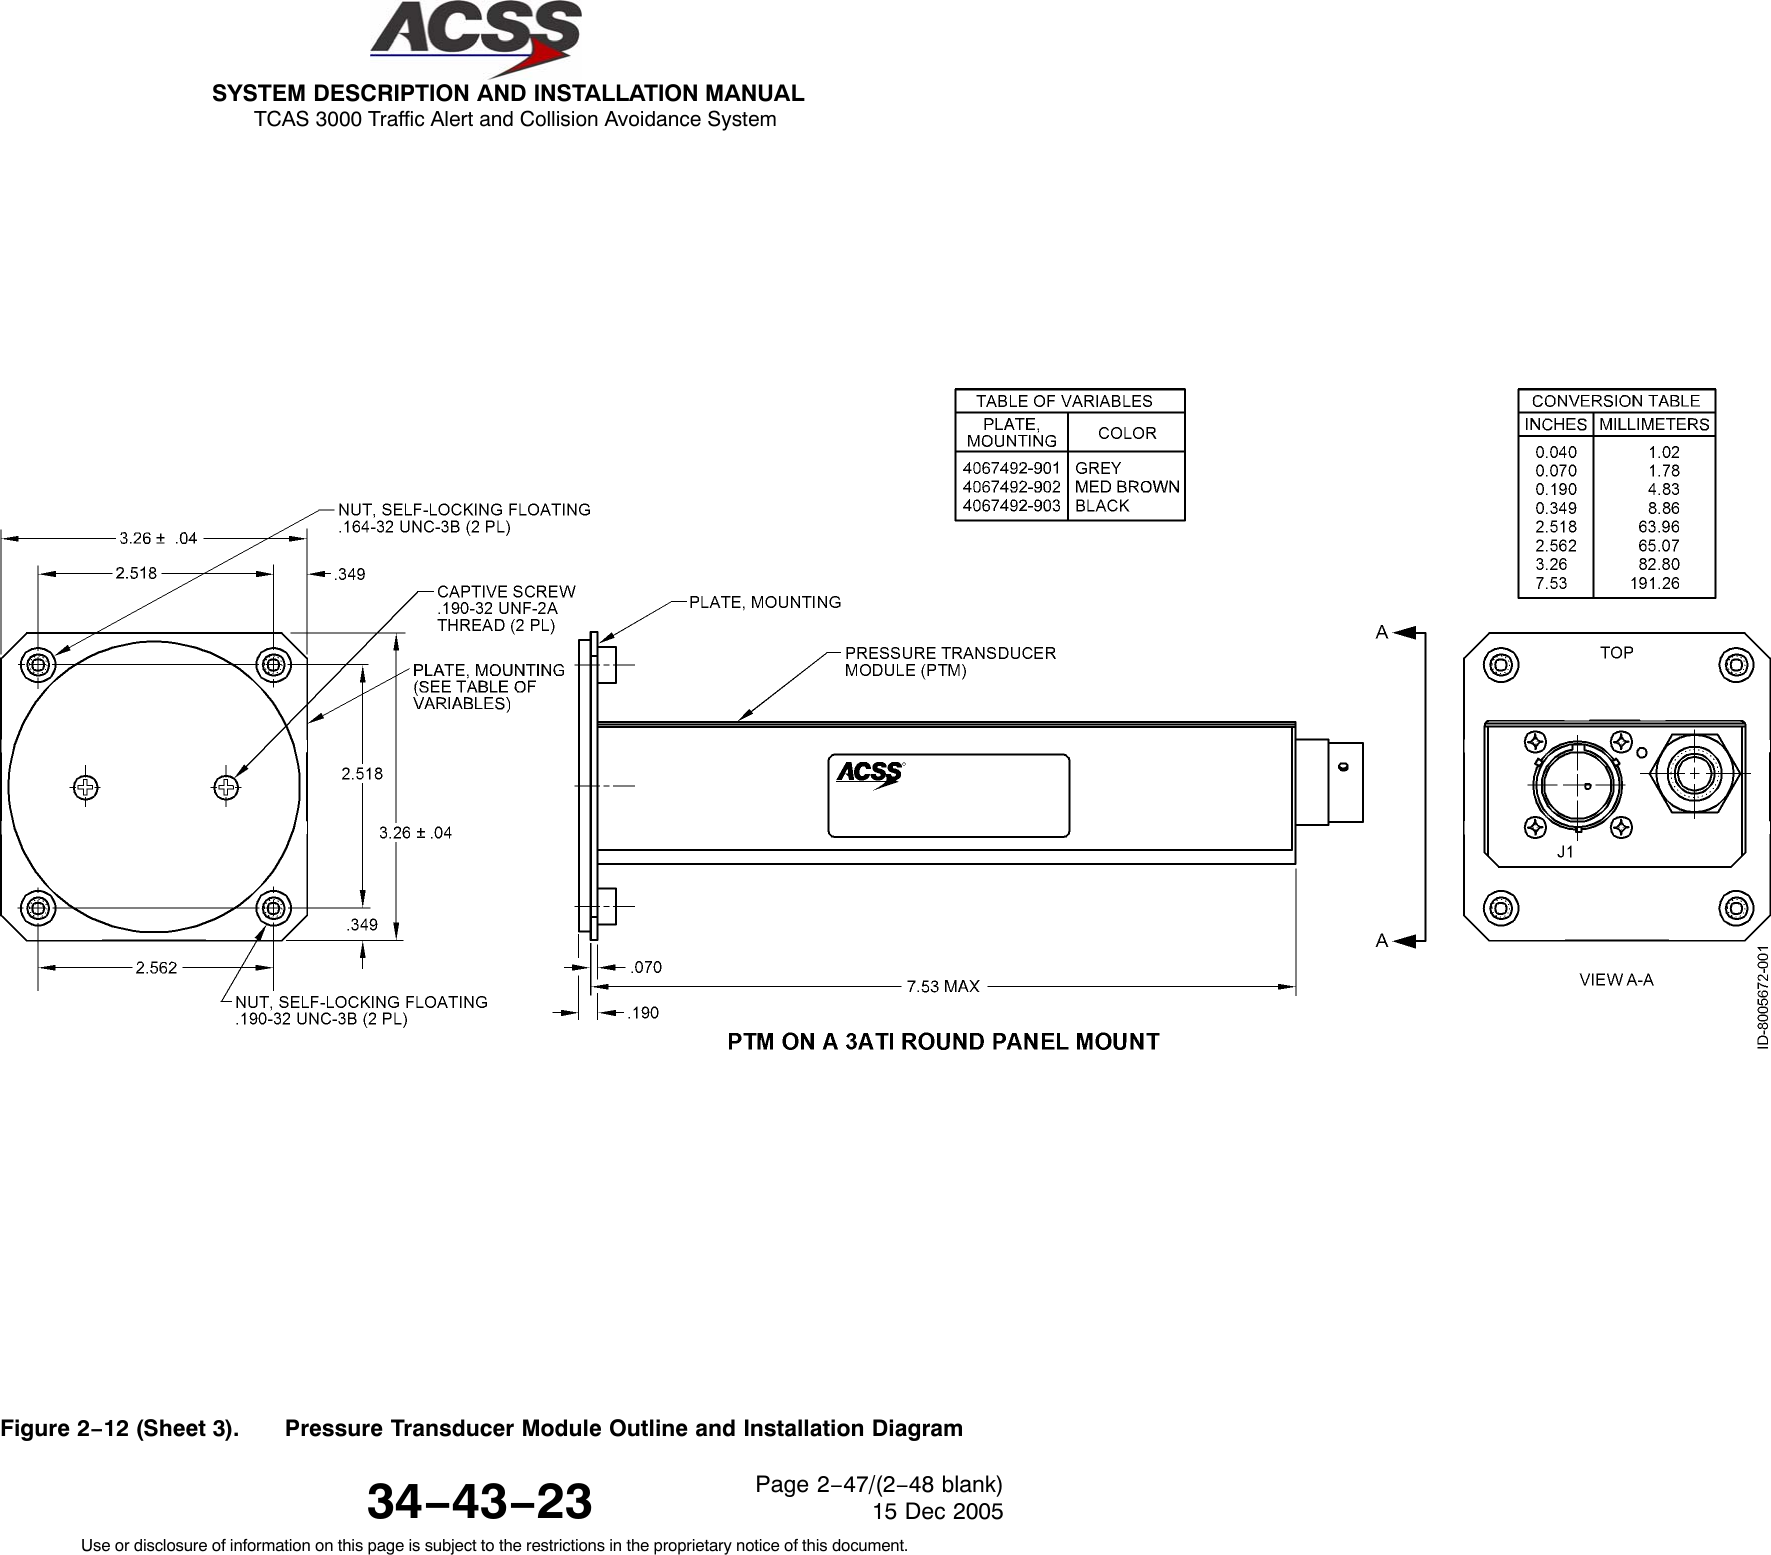 SYSTEM DESCRIPTION AND INSTALLATION MANUAL TCAS 3000 Traffic Alert and Collision Avoidance System34−43−23Use or disclosure of information on this page is subject to the restrictions in the proprietary notice of this document.Page 2−47/(2−48 blank)15 Dec 2005Figure 2−12 (Sheet 3). Pressure Transducer Module Outline and Installation Diagram